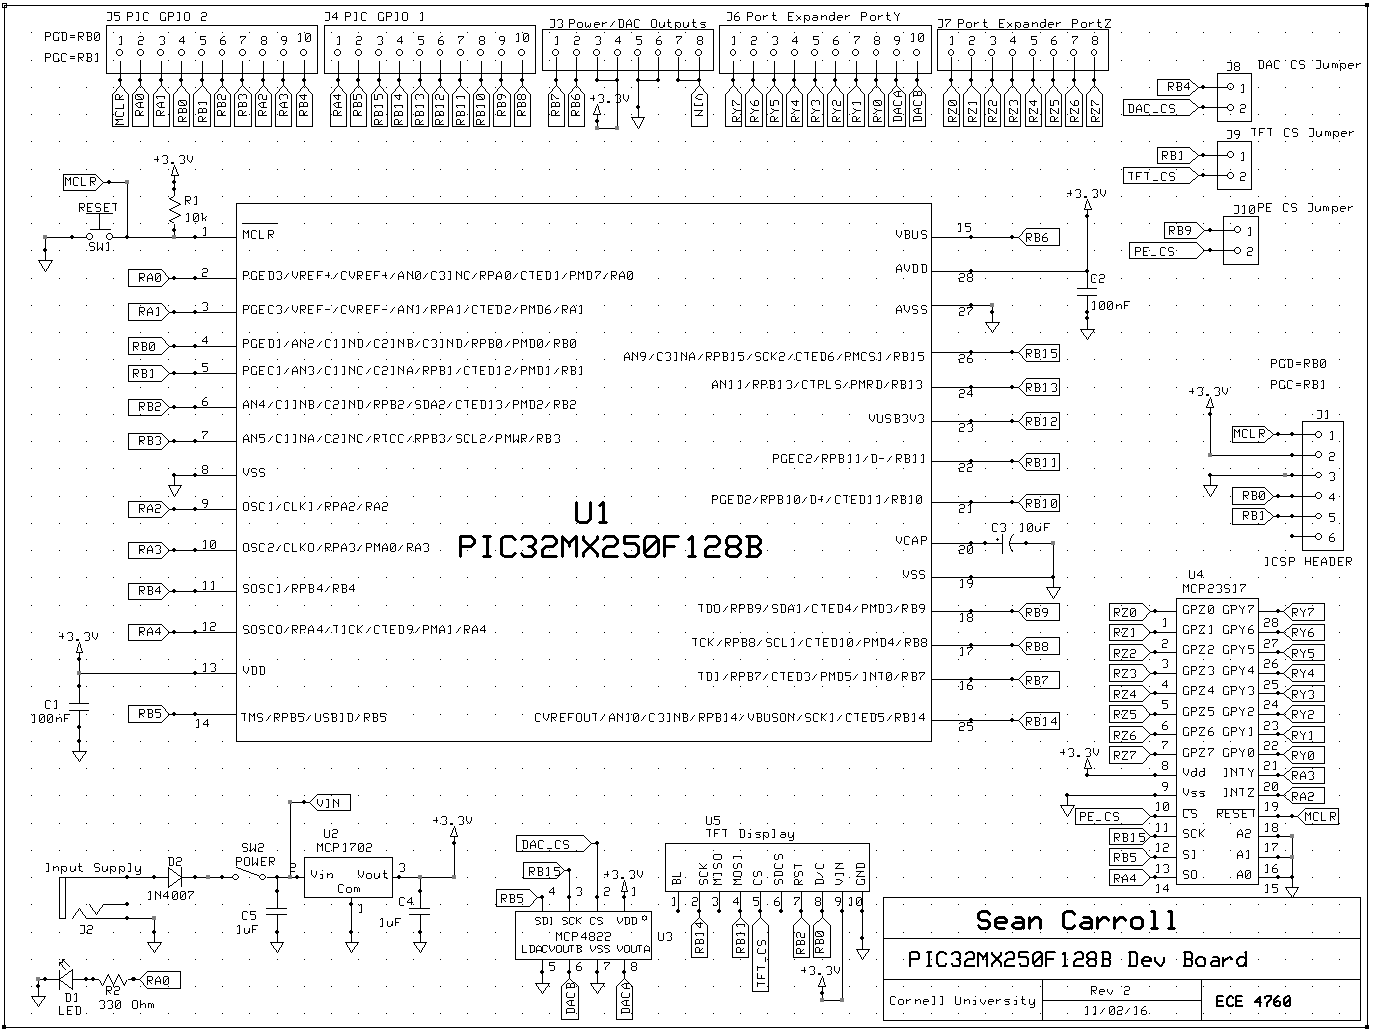 hotlink to current SECABB schematic